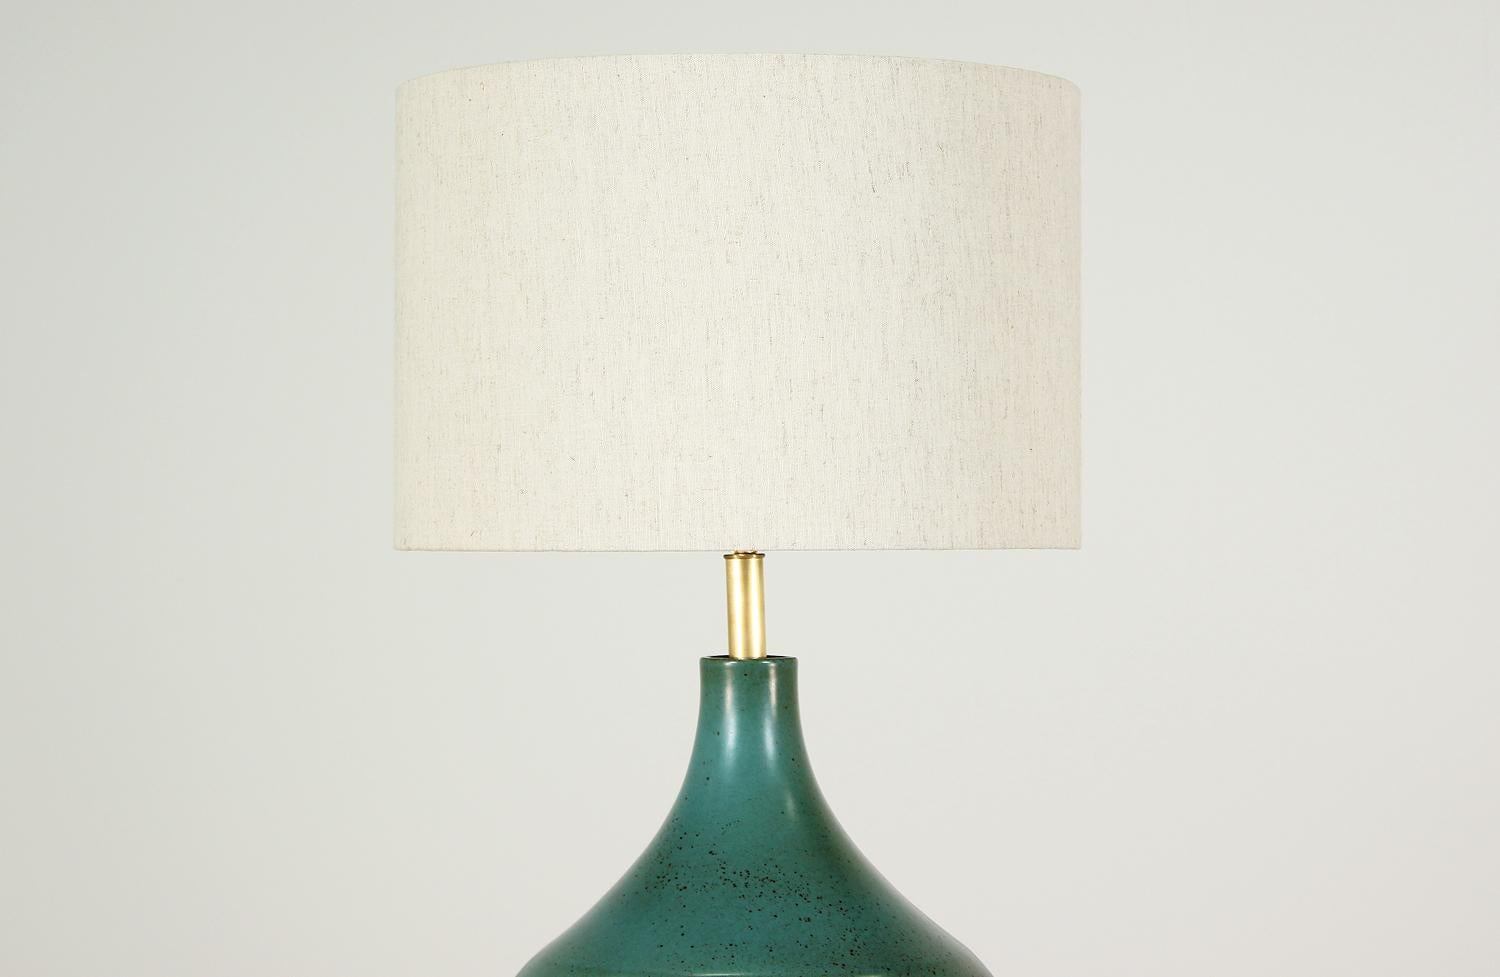 American David Cressey Glazed Teal Ceramic Table Lamp for Architectural Pottery